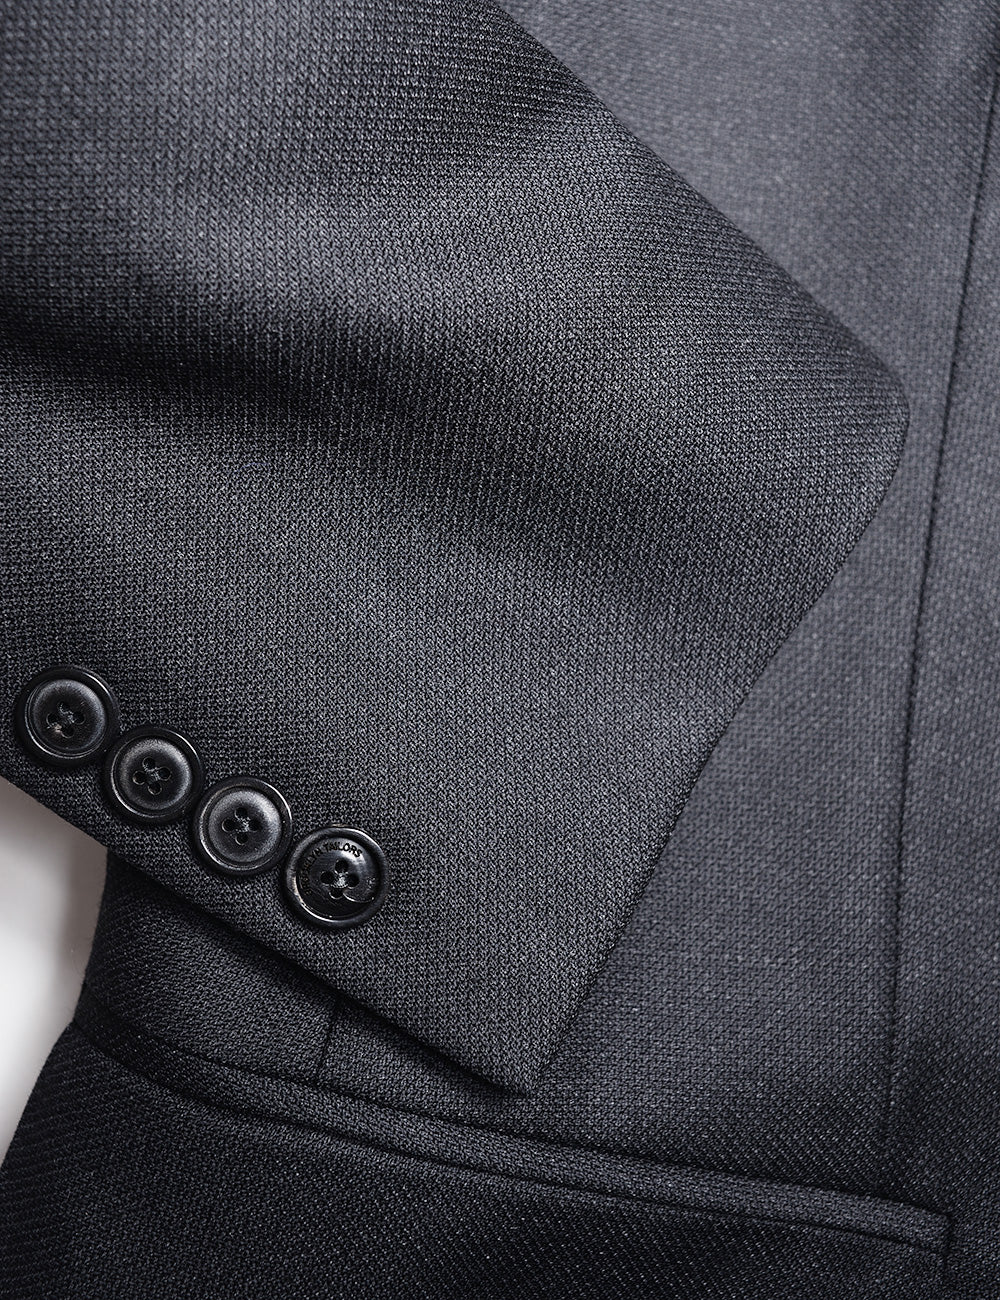 Detail of BKT50 Tailored Jacket in Birdseye Weave - Black showing fabric texture and cuff